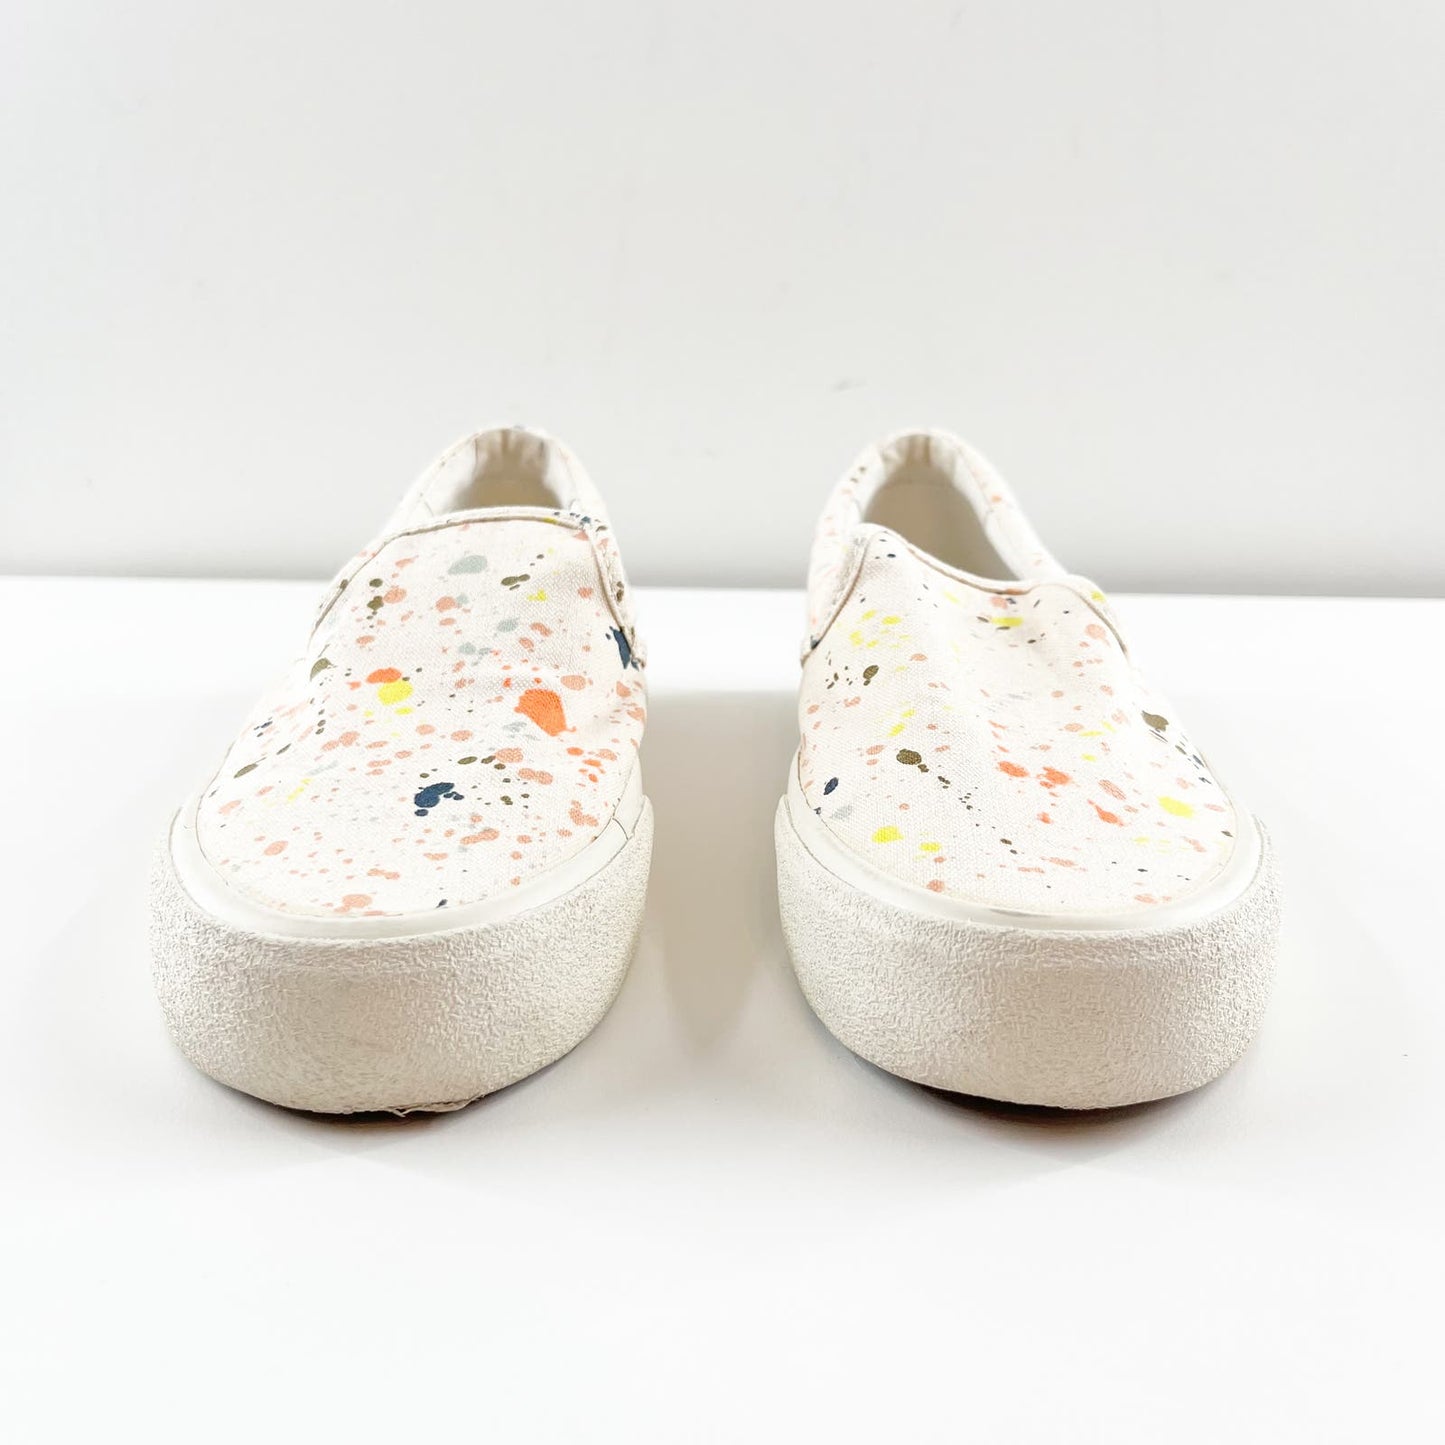 Madewell Sidewalk Slip-On Sneakers in Paint Spattered Recycled Canvas White 7